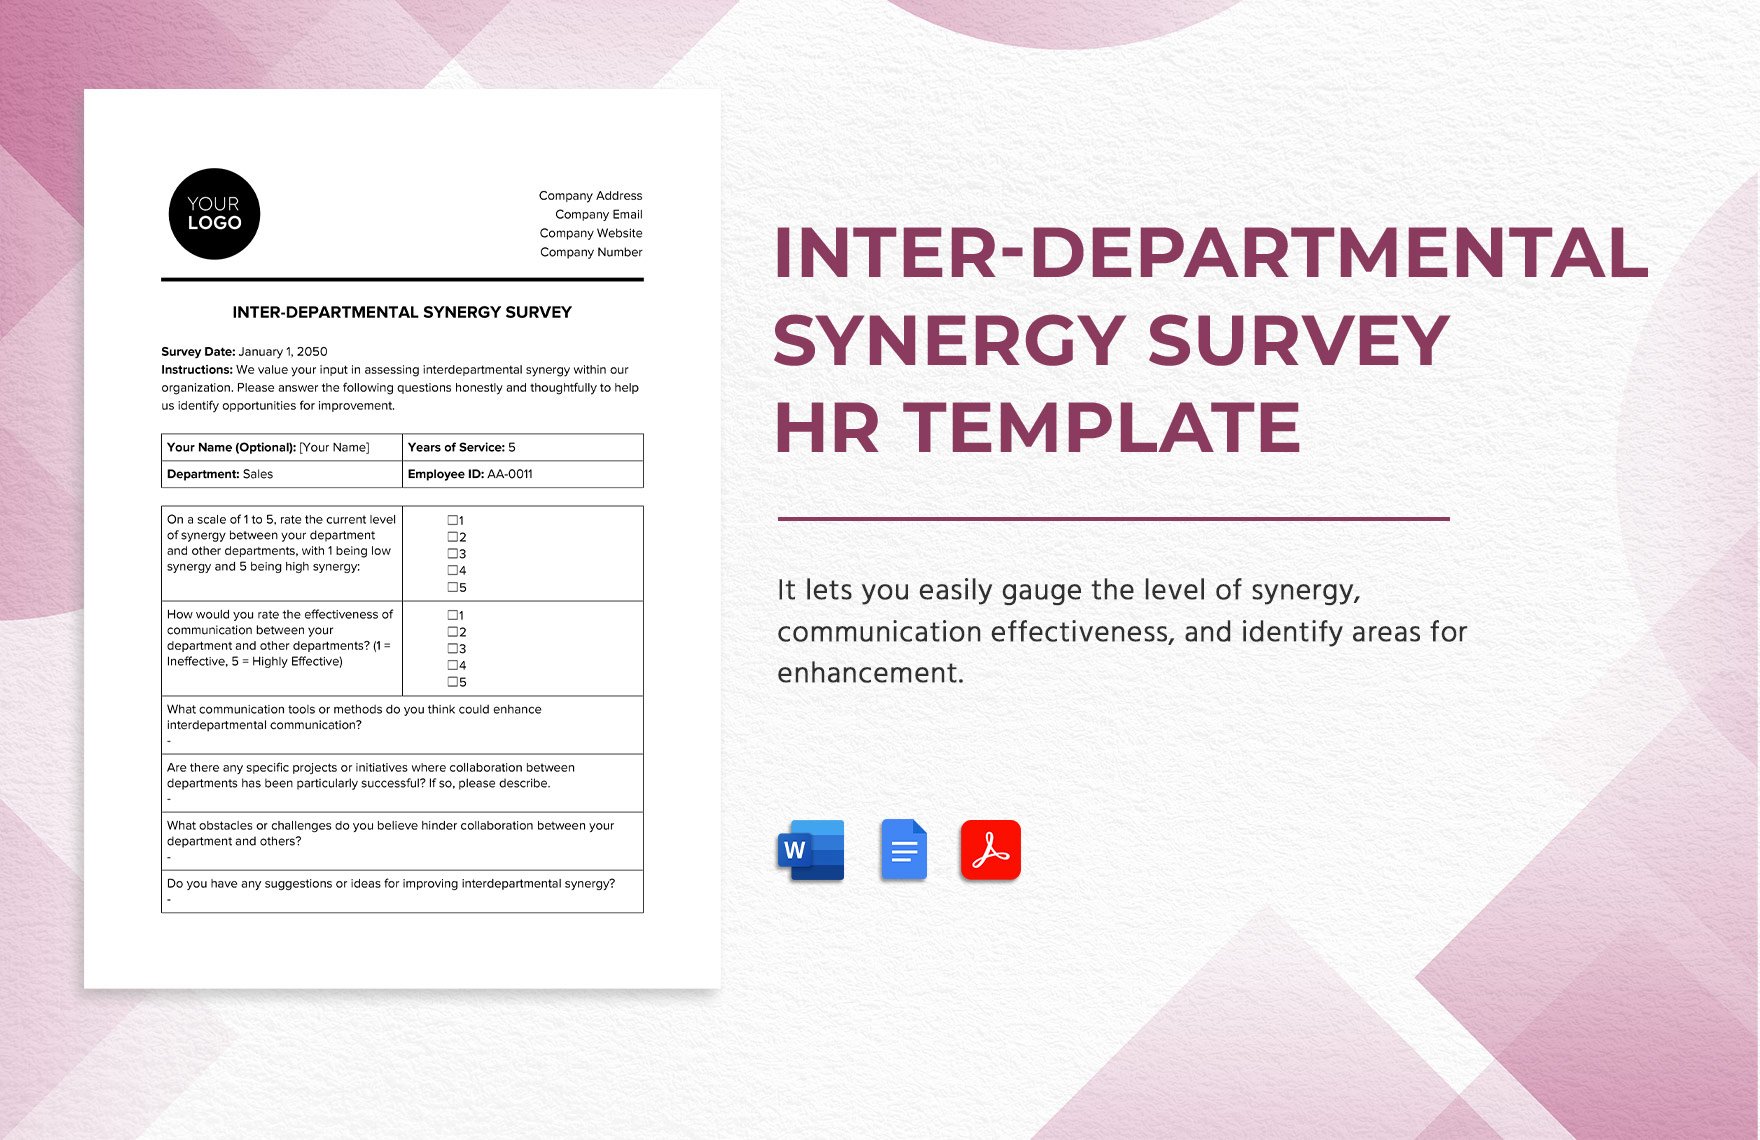 Inter-departmental Synergy Survey HR Template in Word, Google Docs, PDF